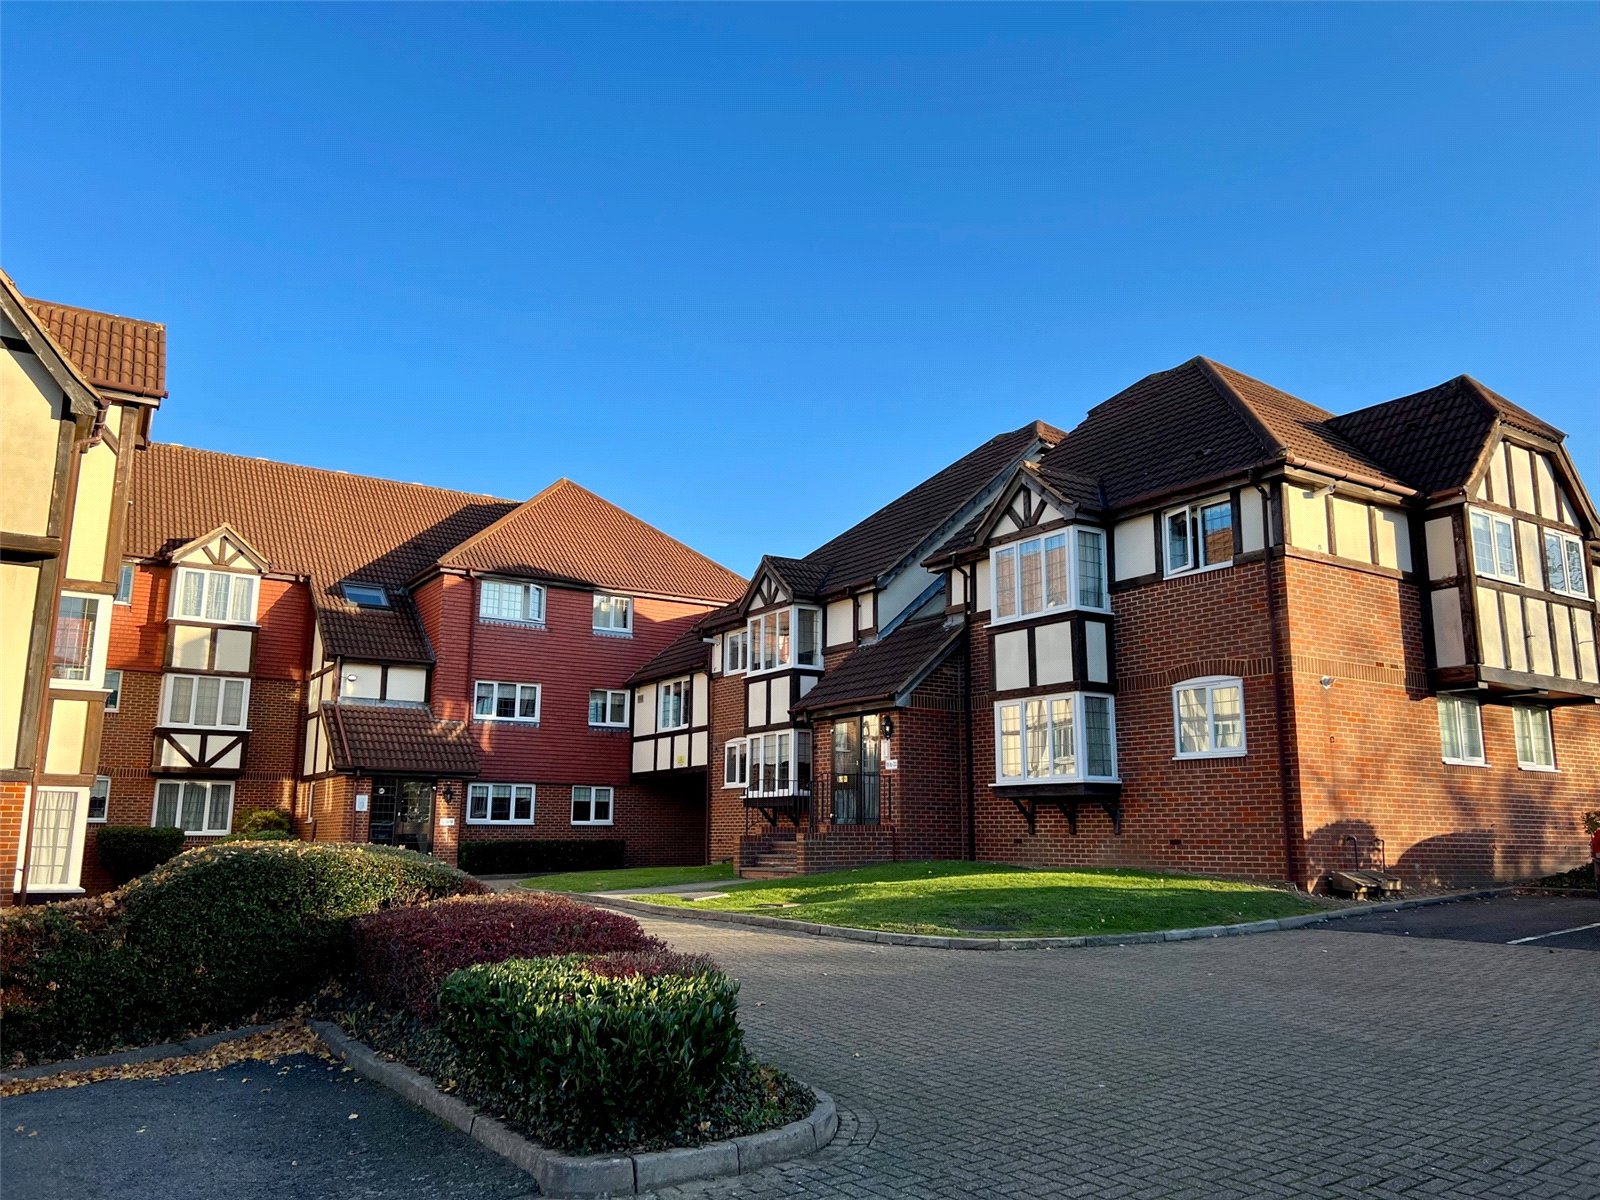 2 bed apartment for sale in Priory Field Drive, Edgware, HA8 